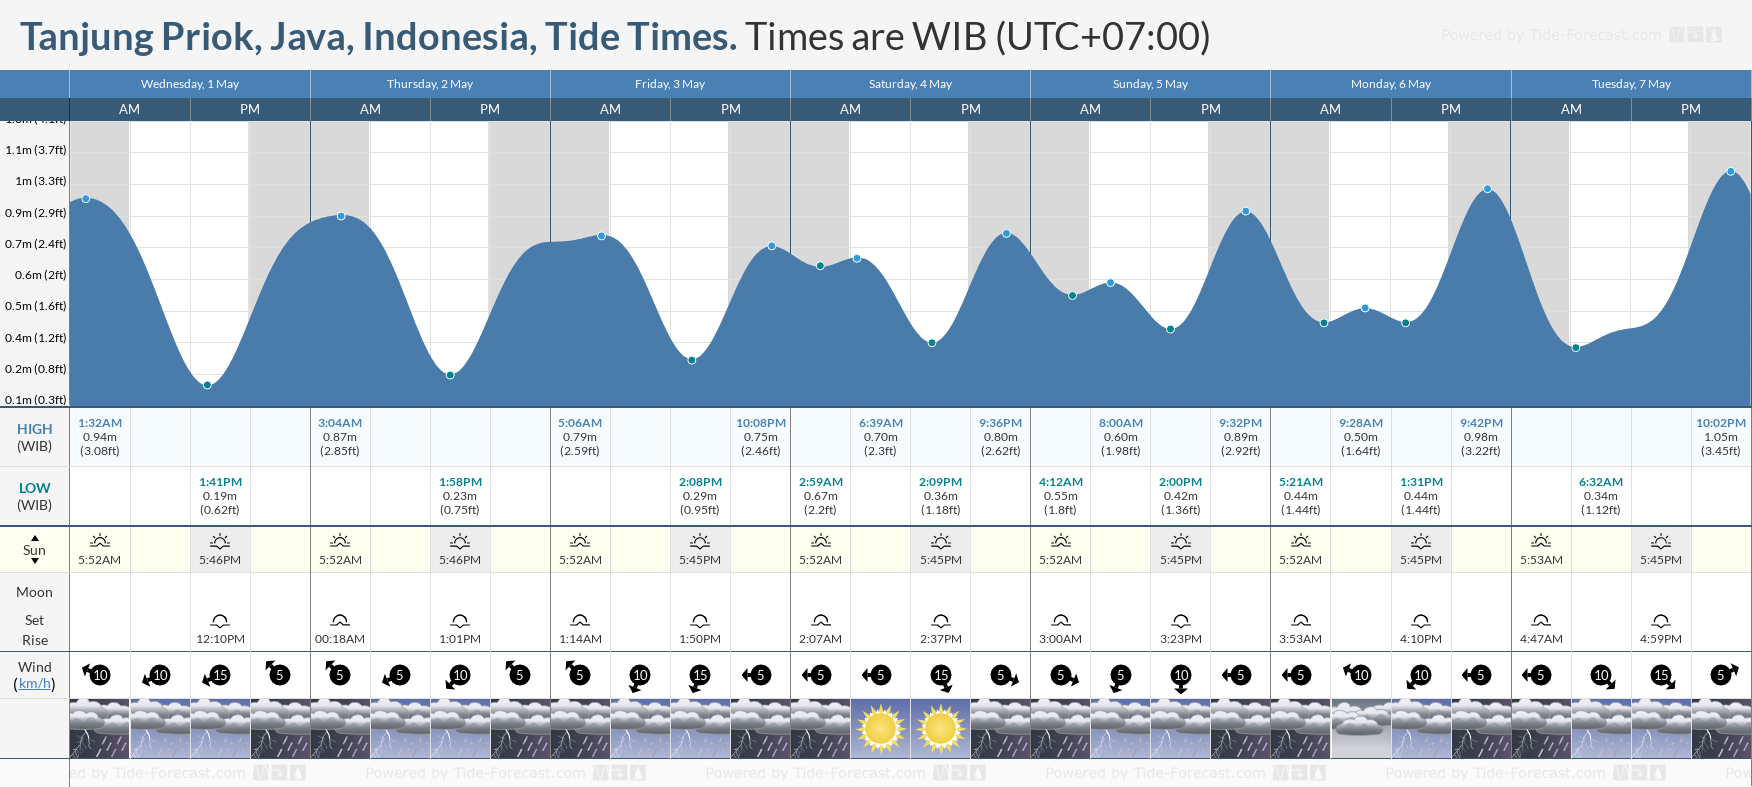 Tanjung Priok, Java, Indonesia Tide Chart including high and low tide tide times for the next 7 days